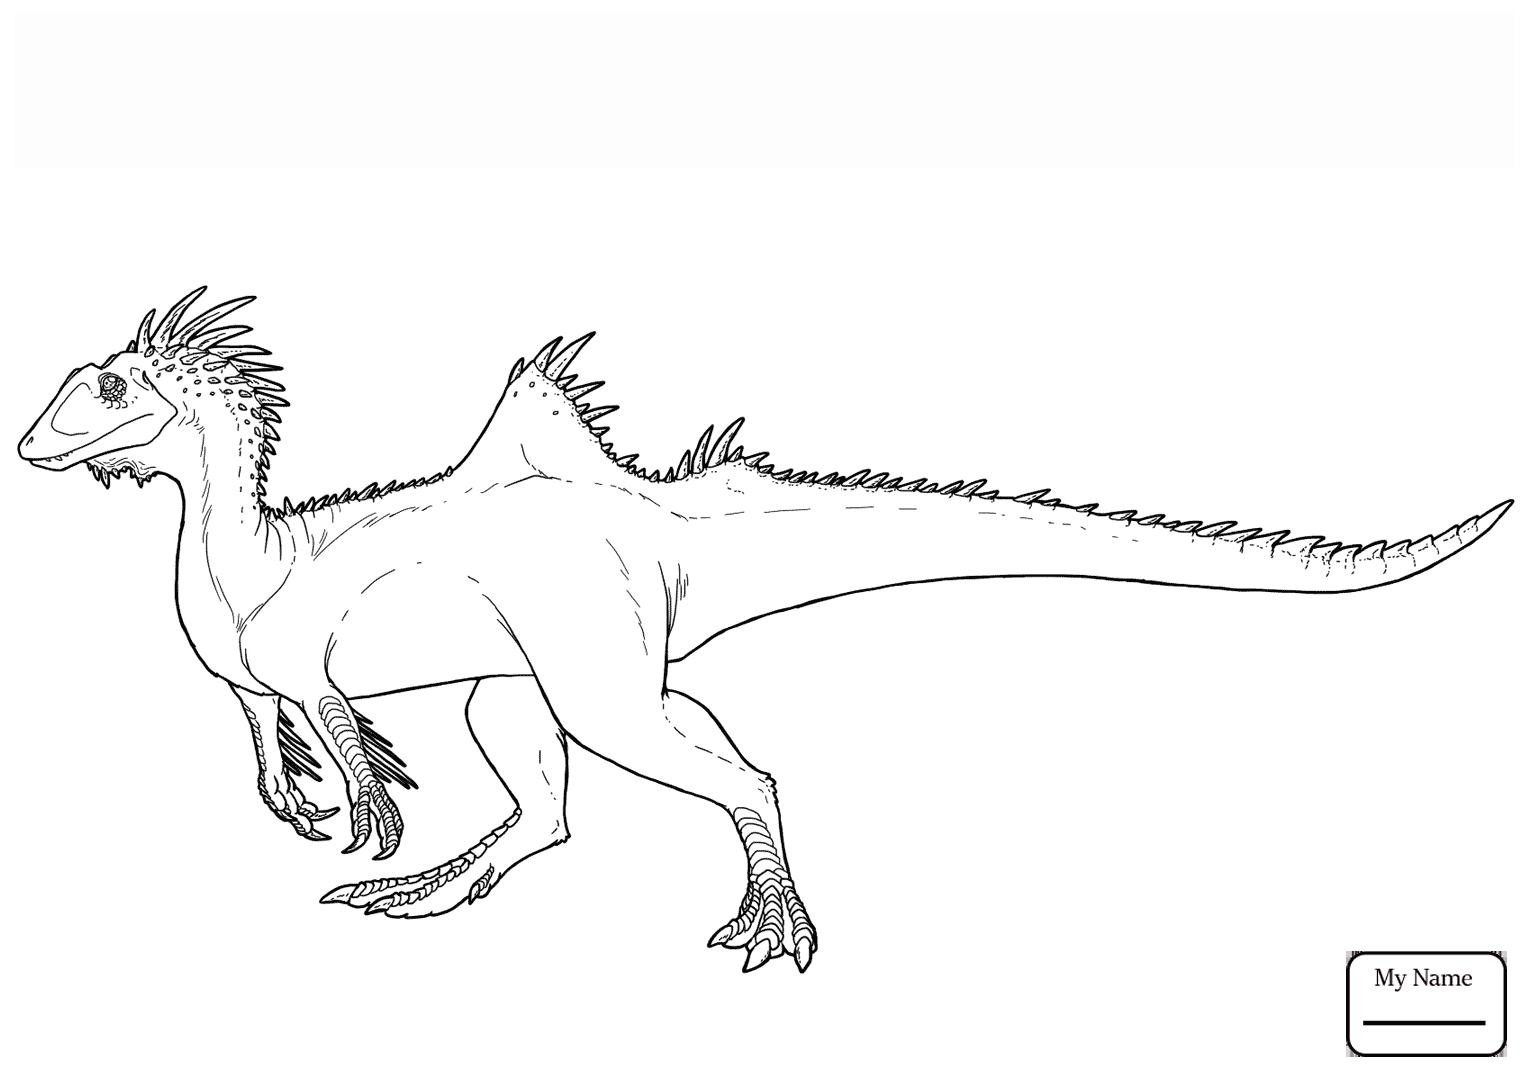 Jurassic World Coloring Pages Carnotaurus - canvas-link